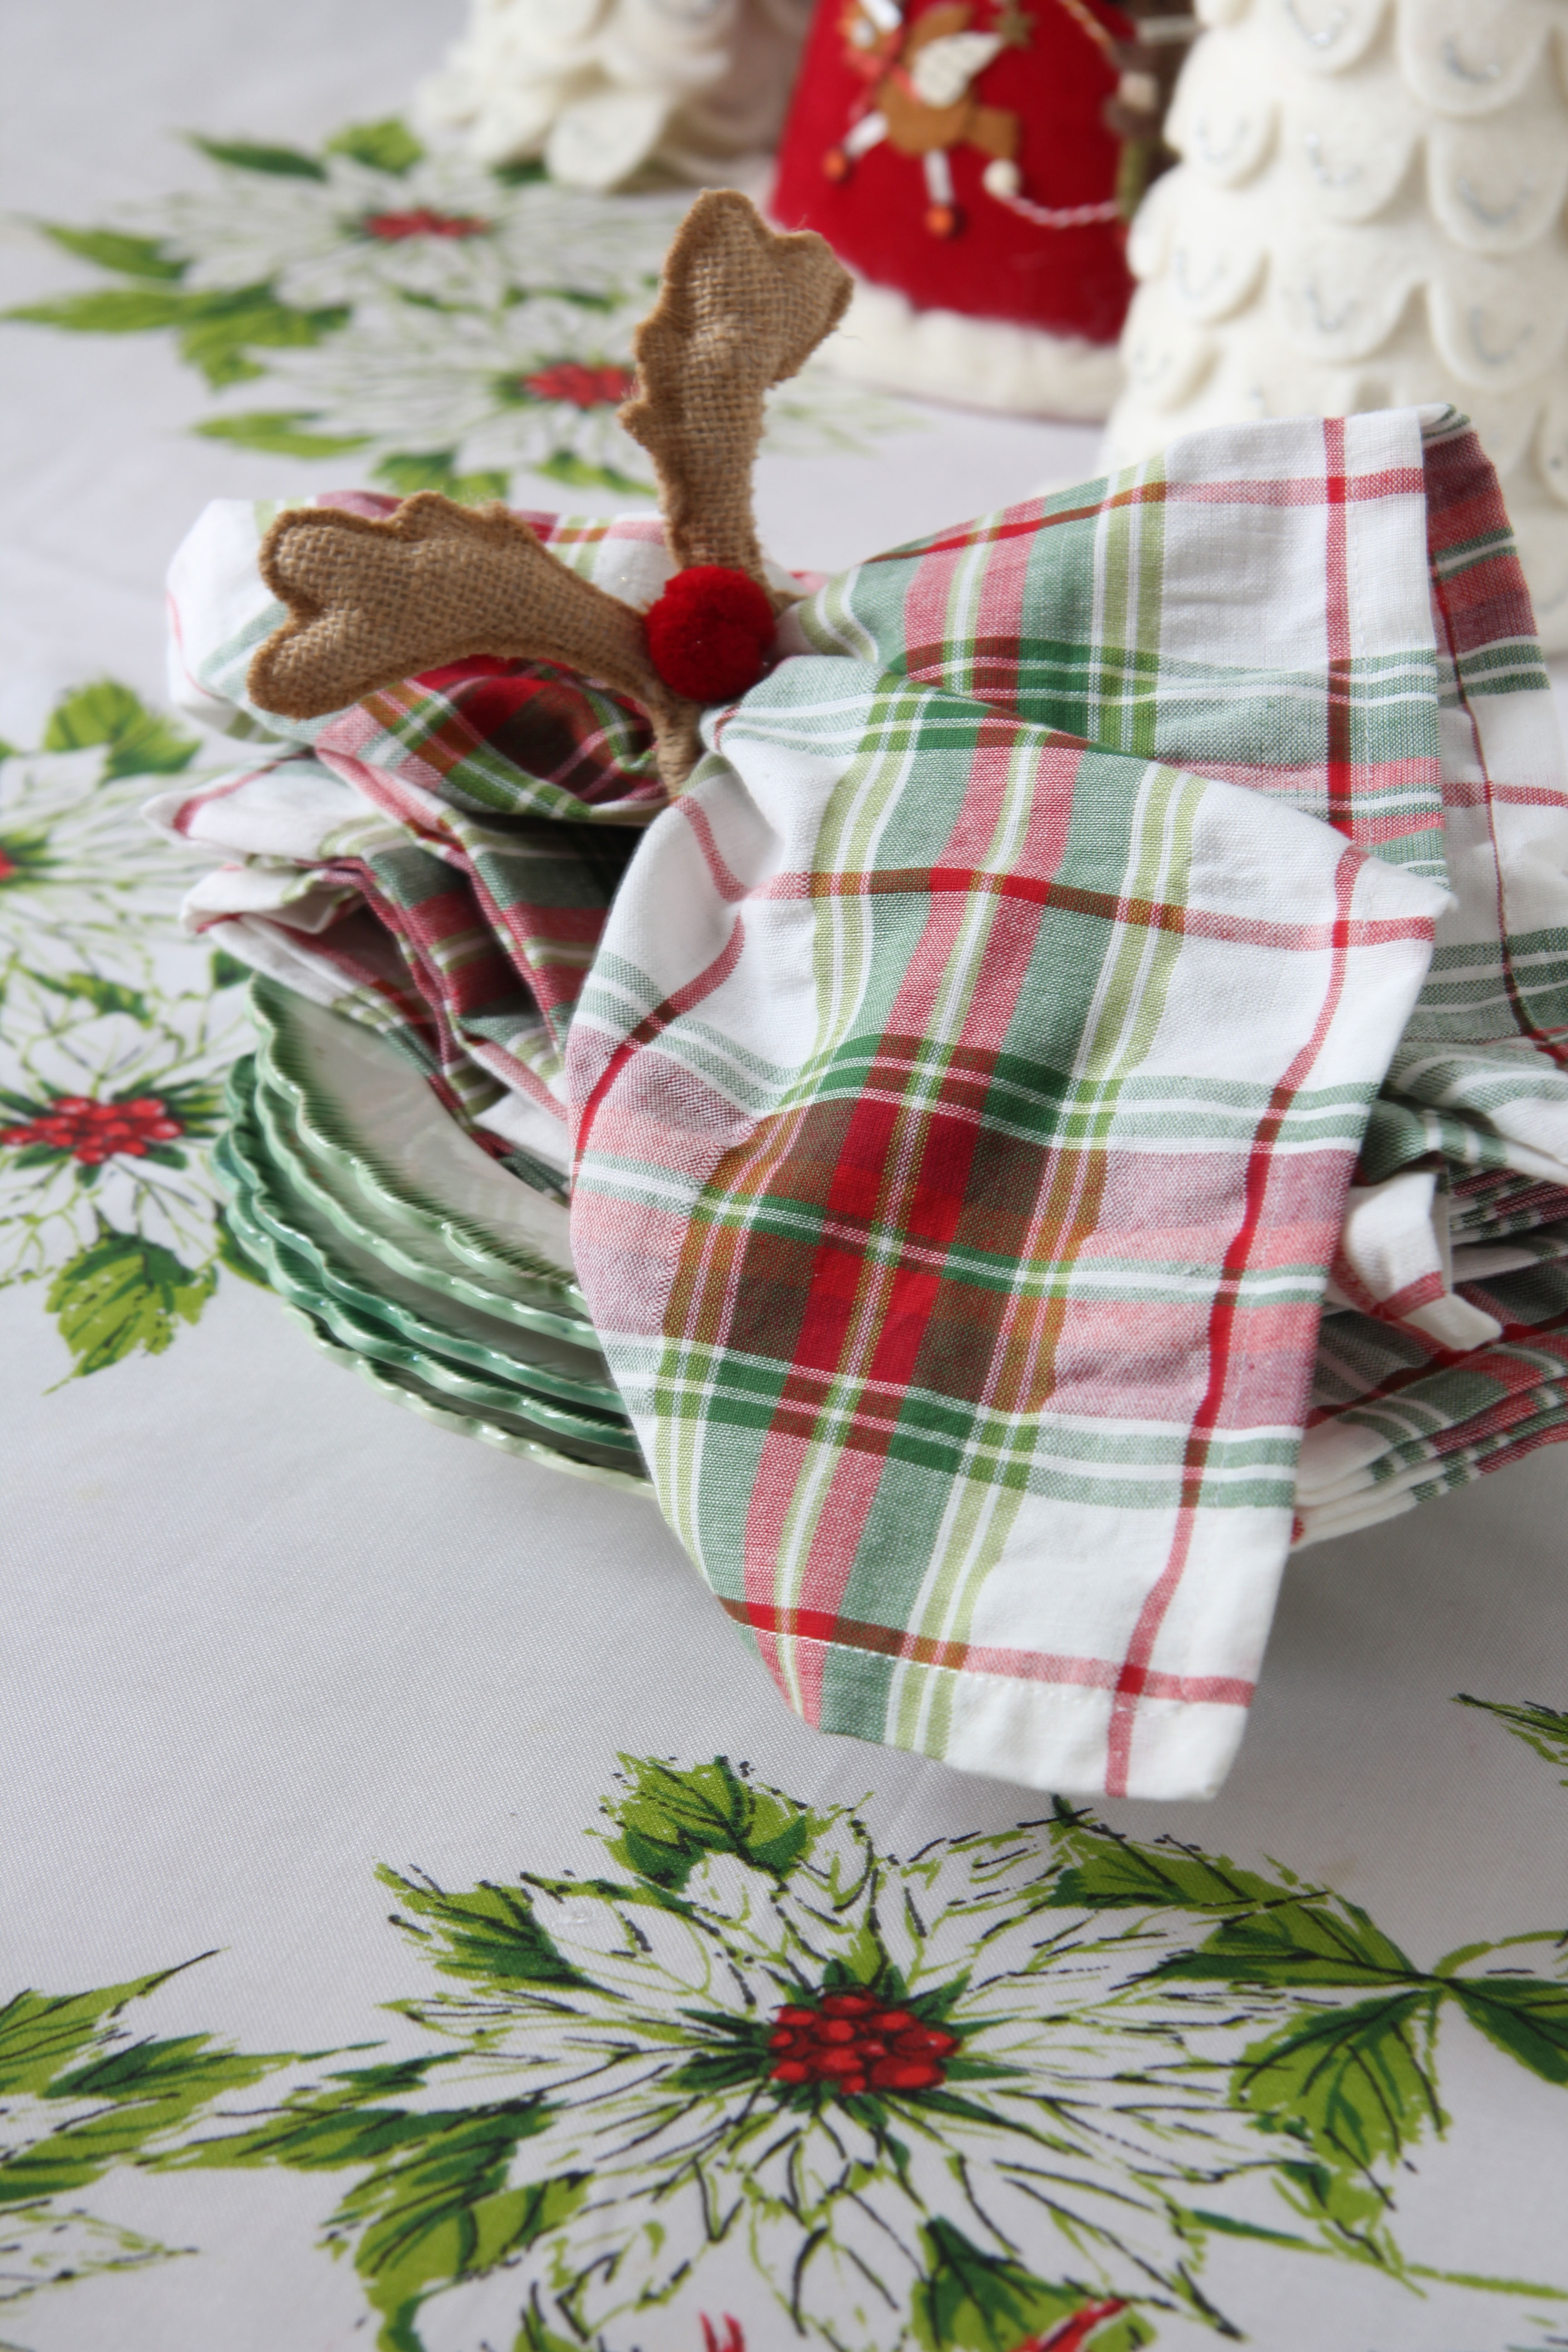 Mixing and matching your plaid, tartan and holiday linens at Christmas is a fun and festive way to decorate your table. 